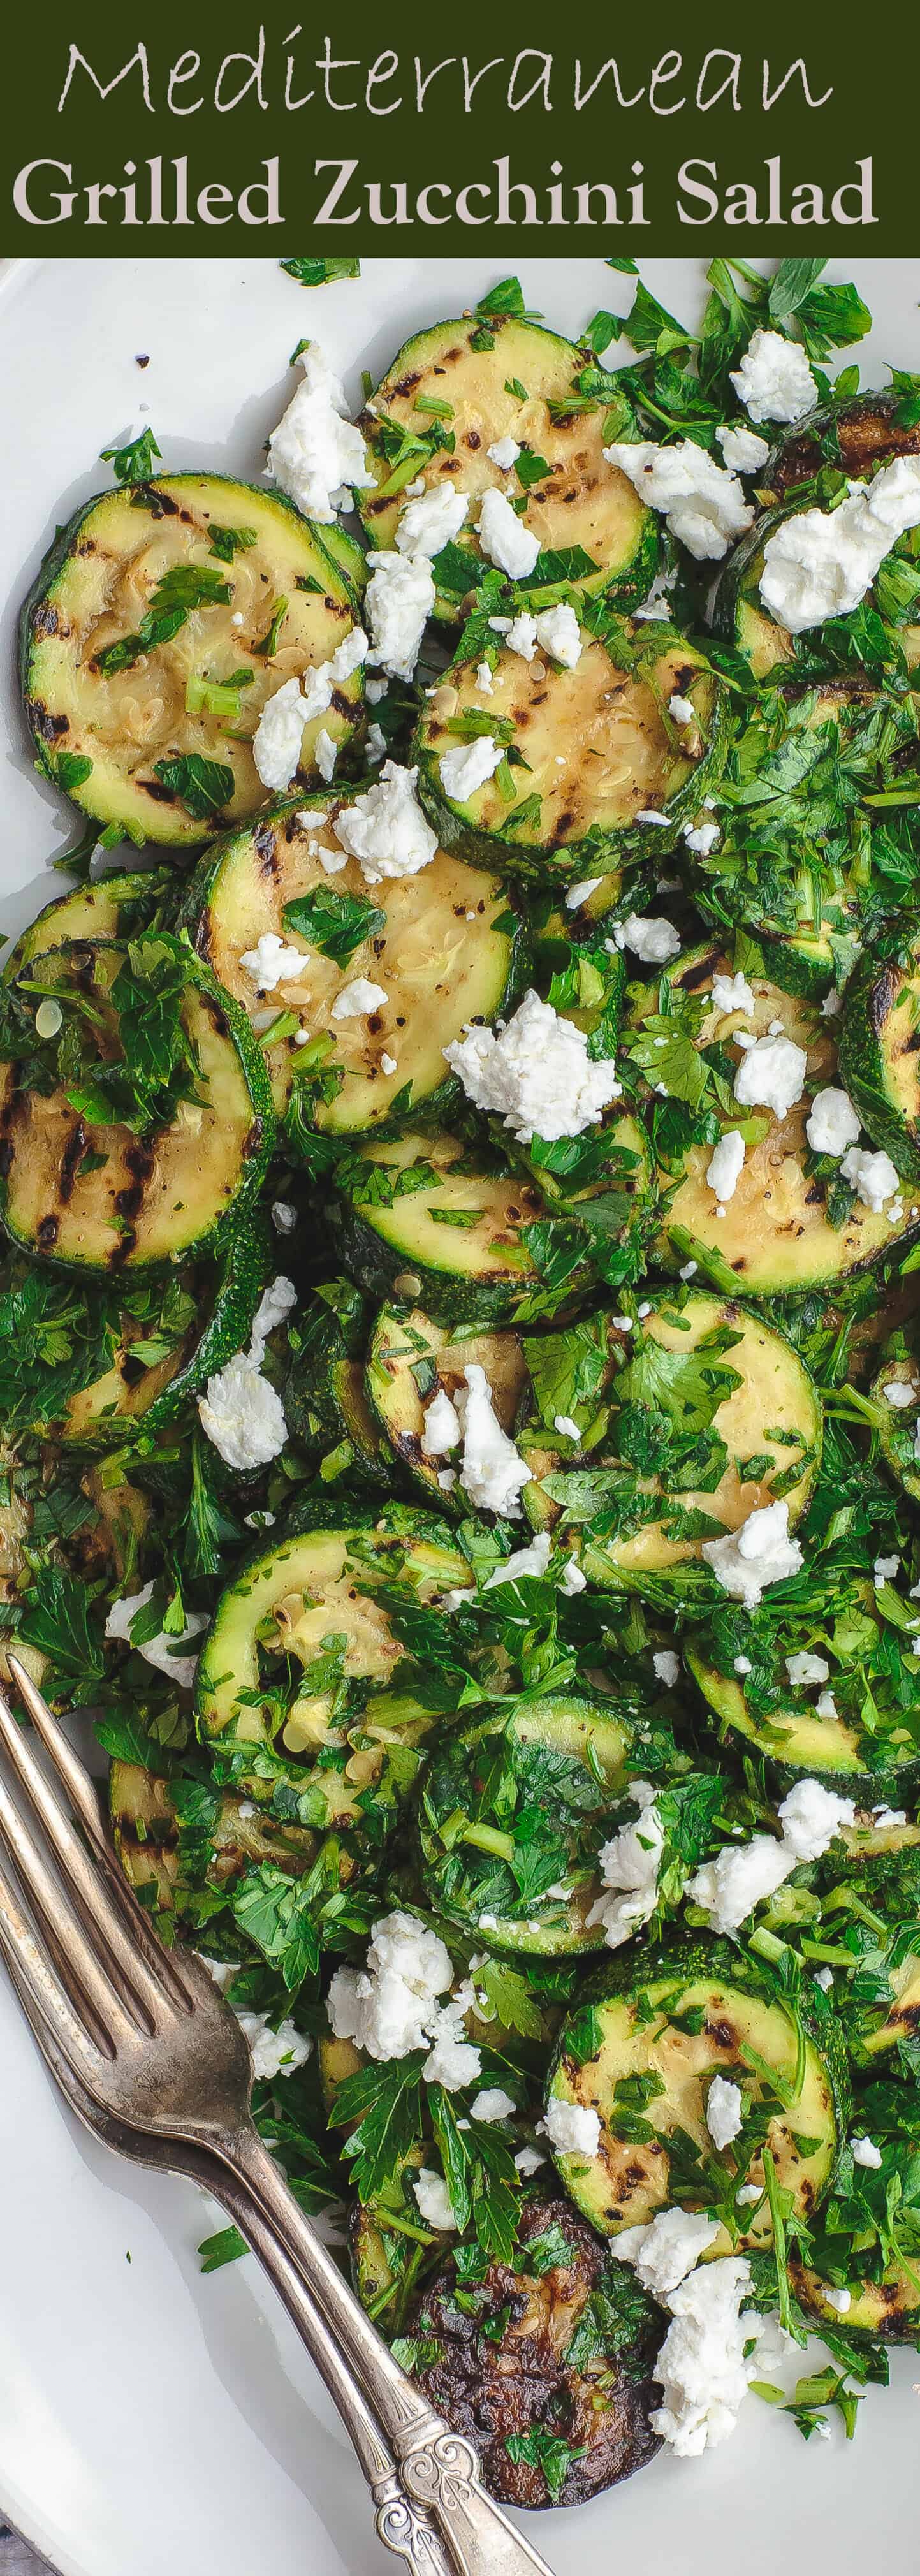 Mediterranean Style Grilled Zucchini Salad | The Mediterranean Dish. Simple, flavor-packed grilled zucchini with fresh herbs and other Mediterranean favorites. Ready in 15 minutes. Recipe from TheMediterraneanDish.com #zucchini #mediterraneandiet #meditrerraneansalad #zucchinirecipe #healthyrecipes #lowcarb #vegetarianrecipes #easyrecipes